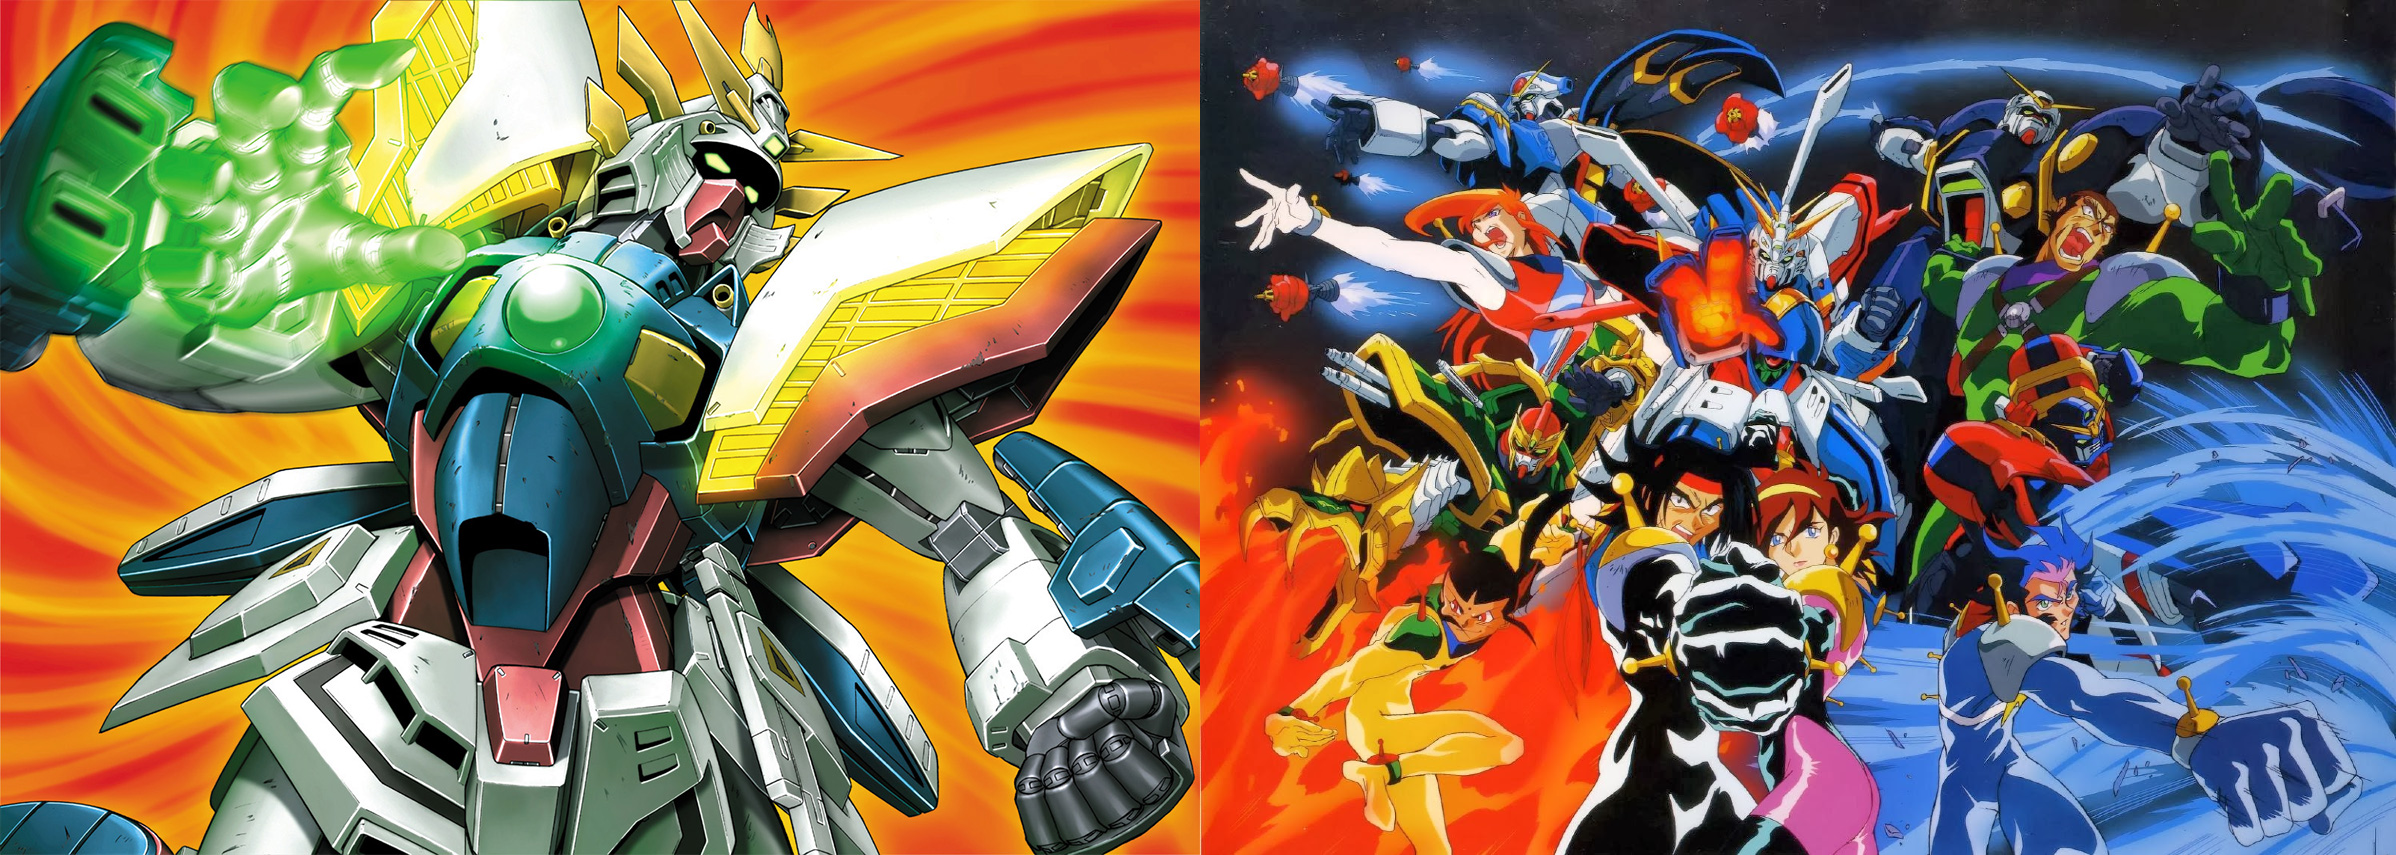 Shining Finger and the main cast from G Gundam